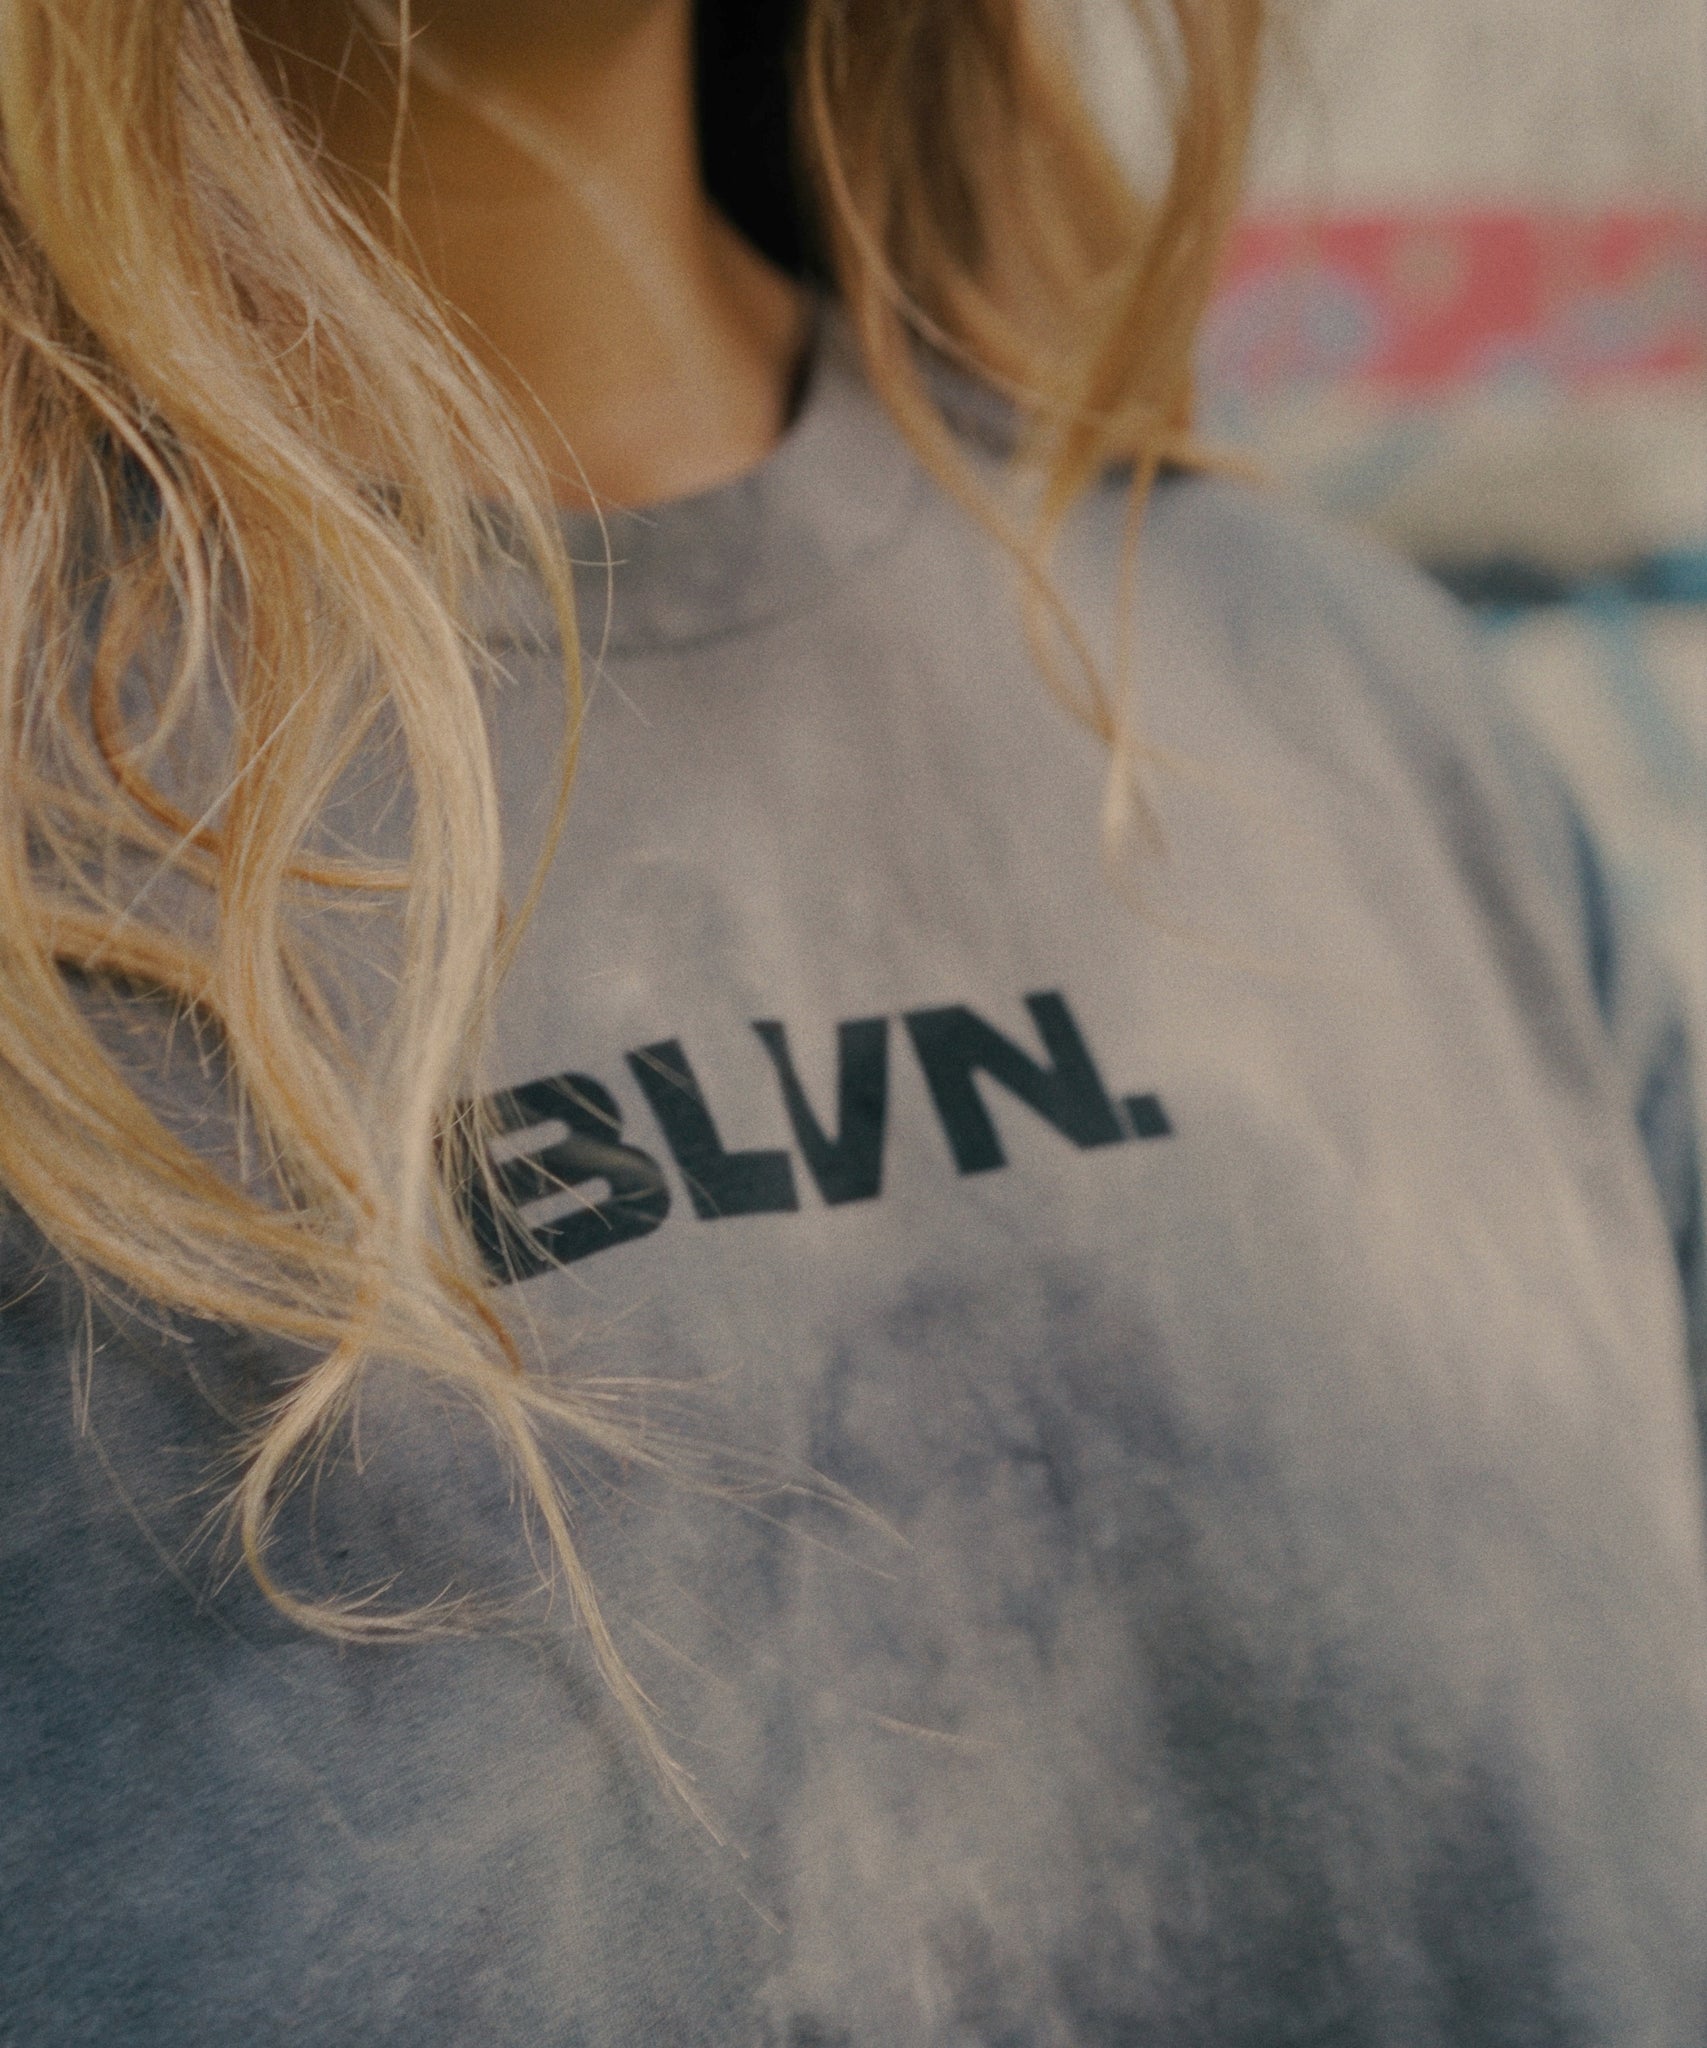 Property of BLVN T-shirt.